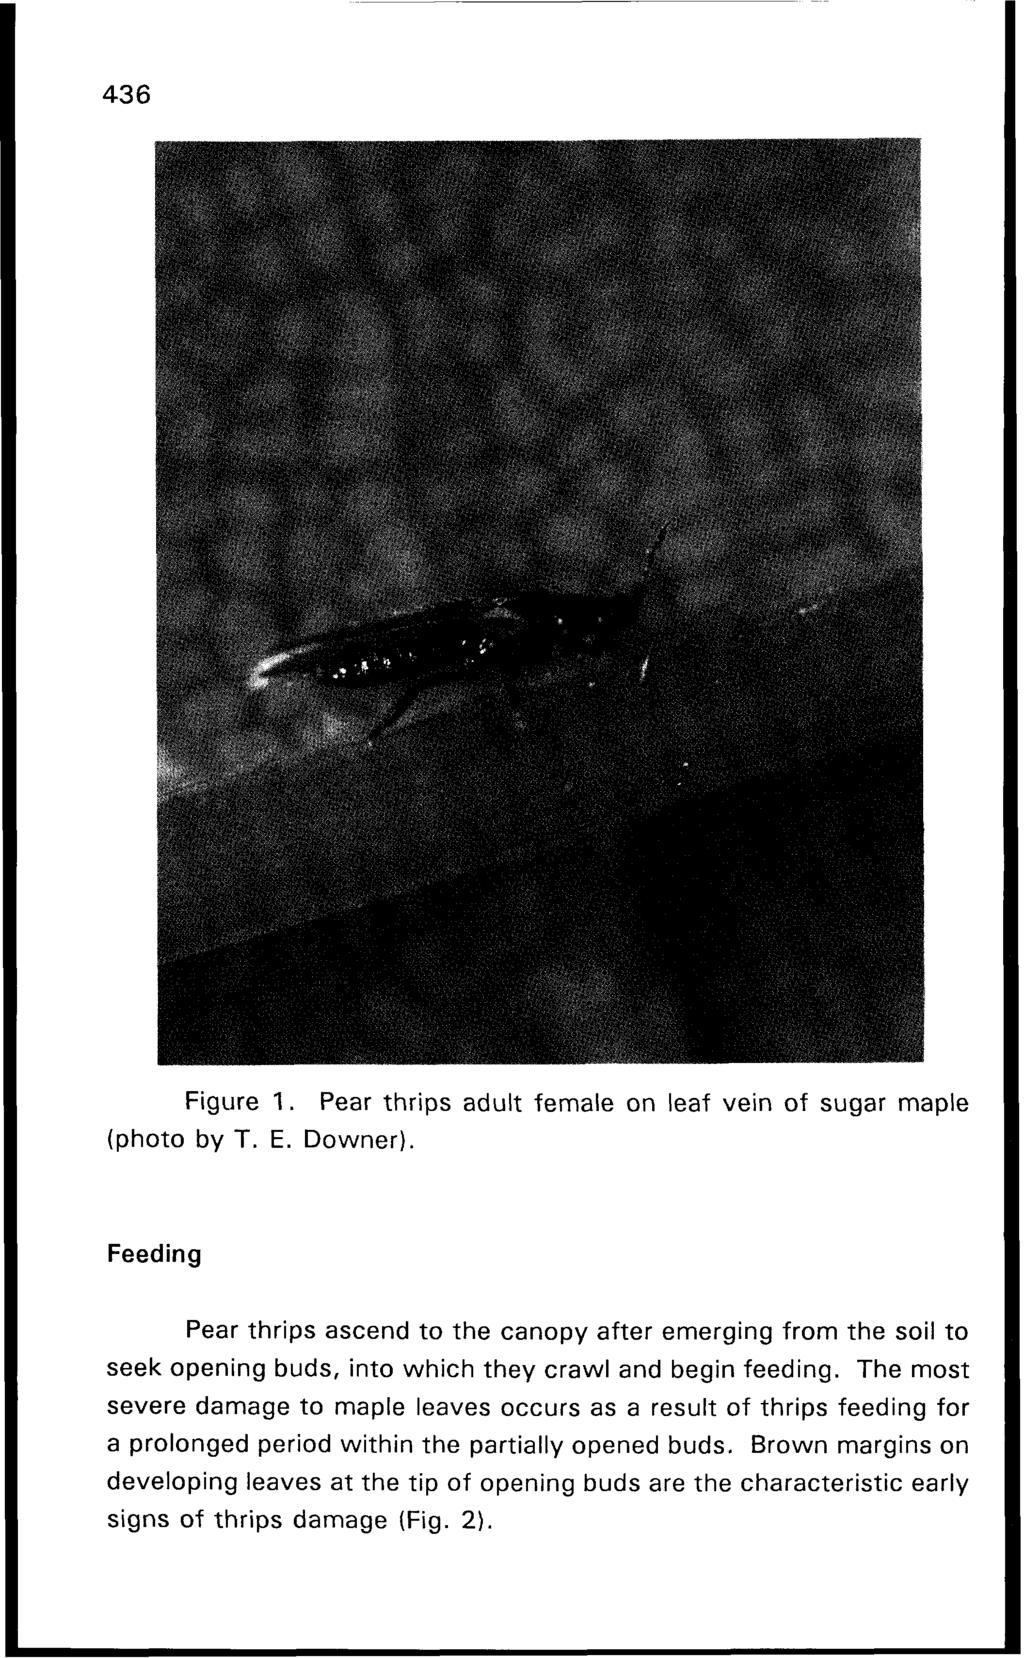 Figure 1. Pear thrips adult female on leaf vein of sugar maple (photo by T. E. Downer).